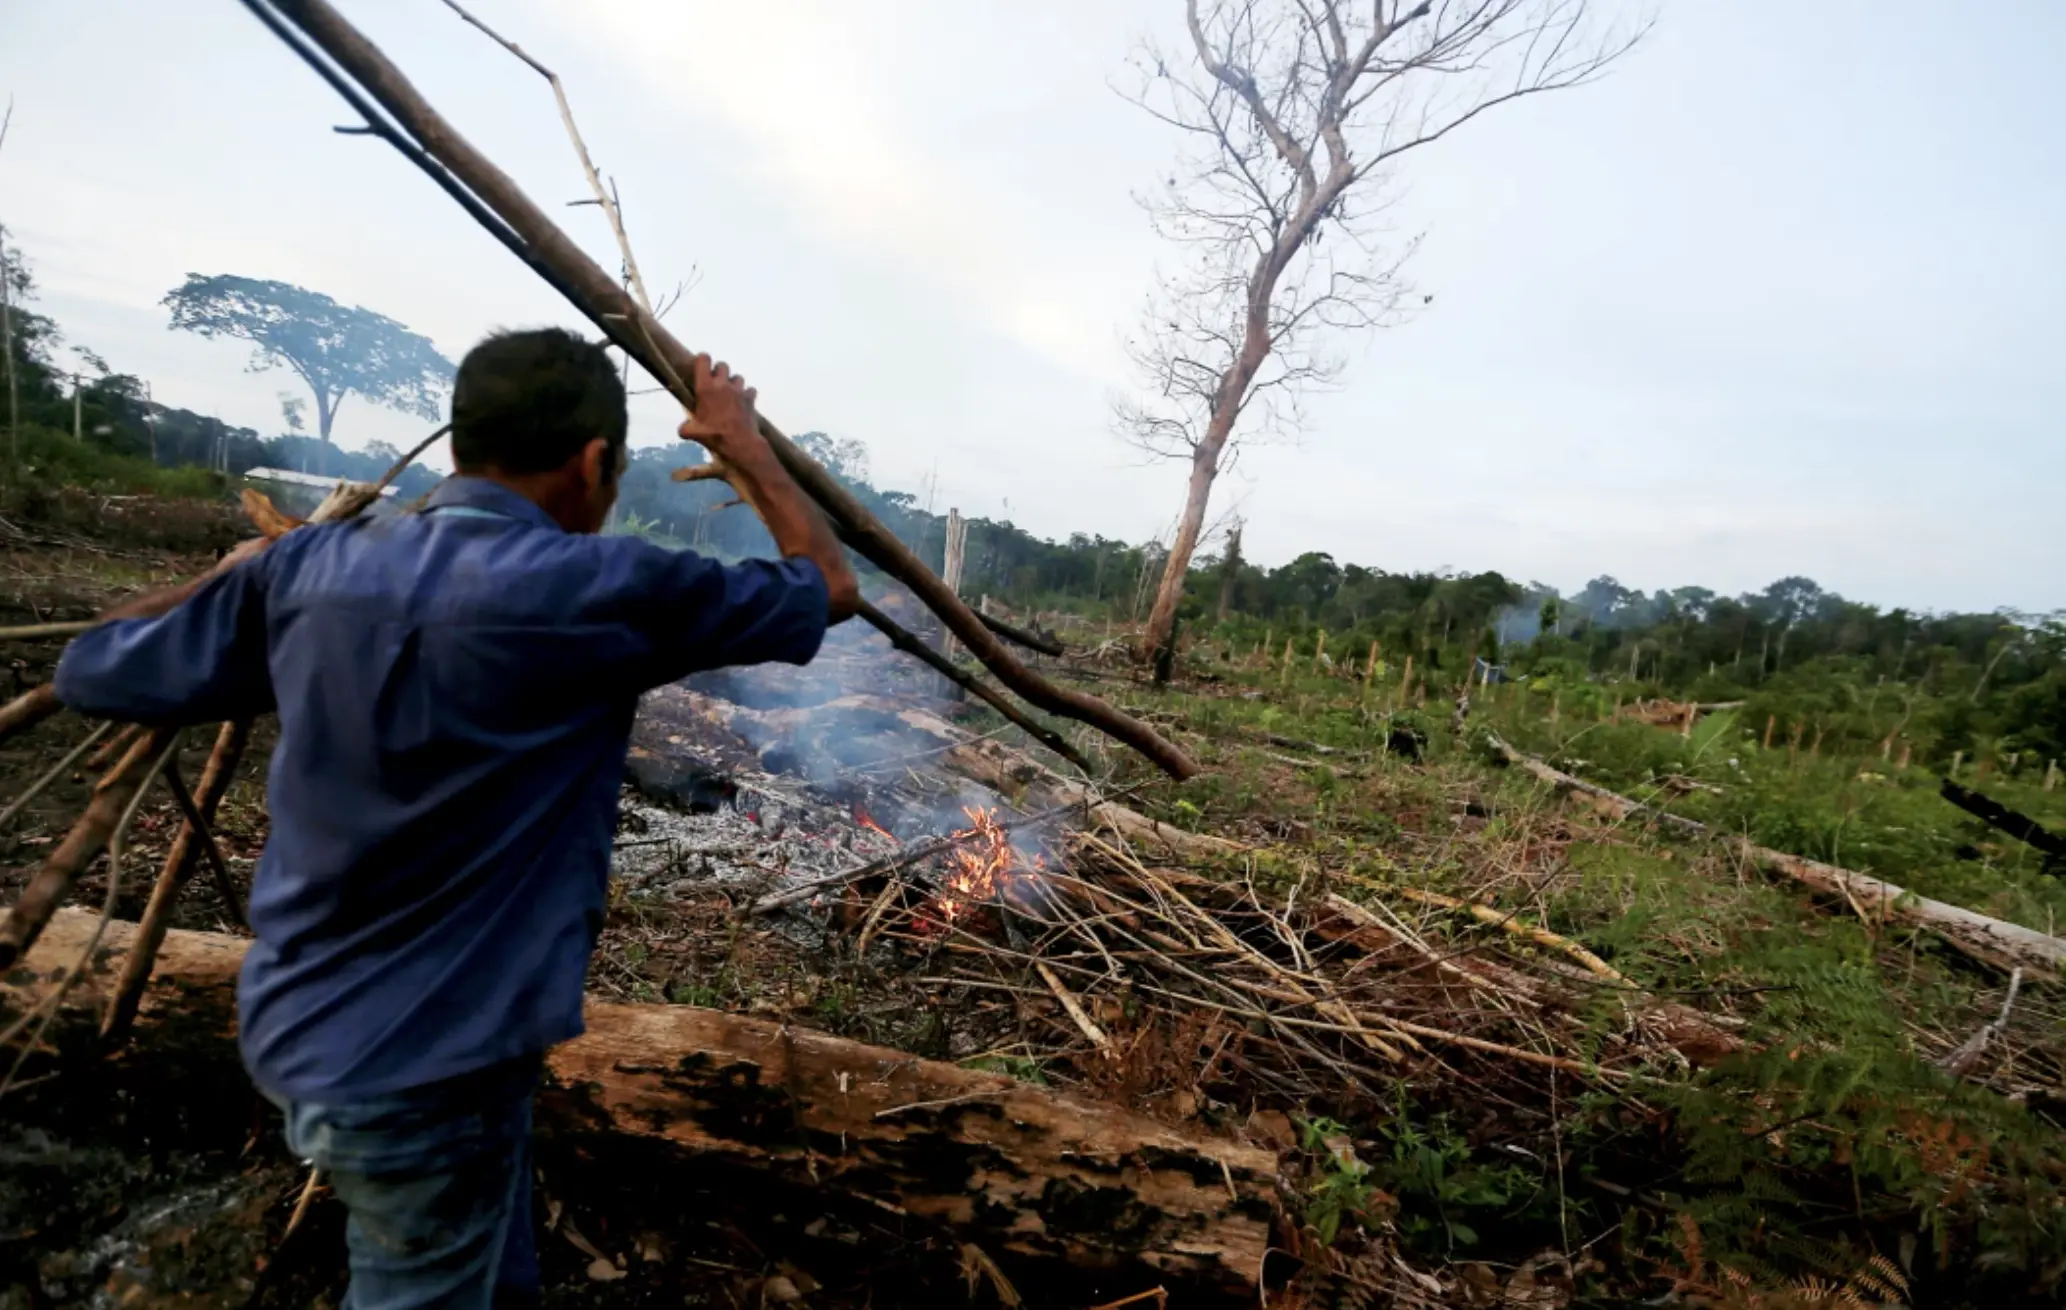 A man slashes and burns a patch of forest near the rainforest